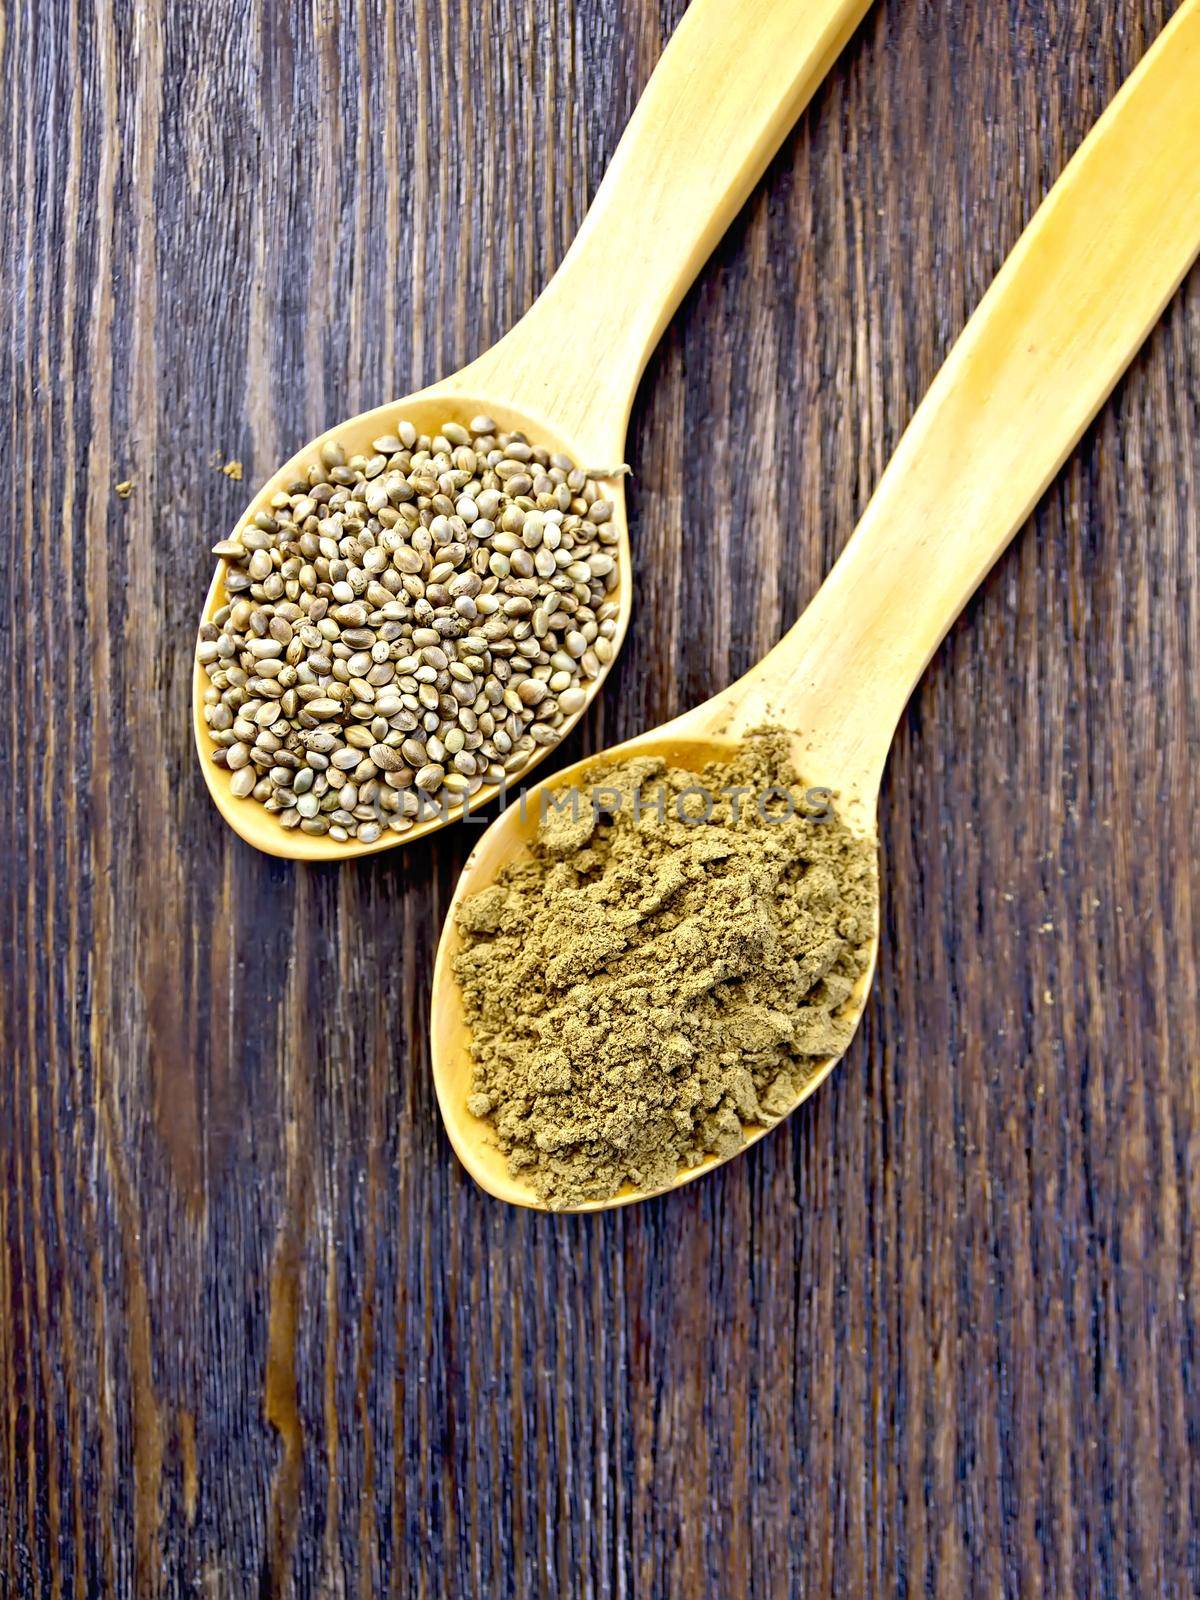 Flour and hemp seed in a wooden spoon on a background of the wooden planks on top